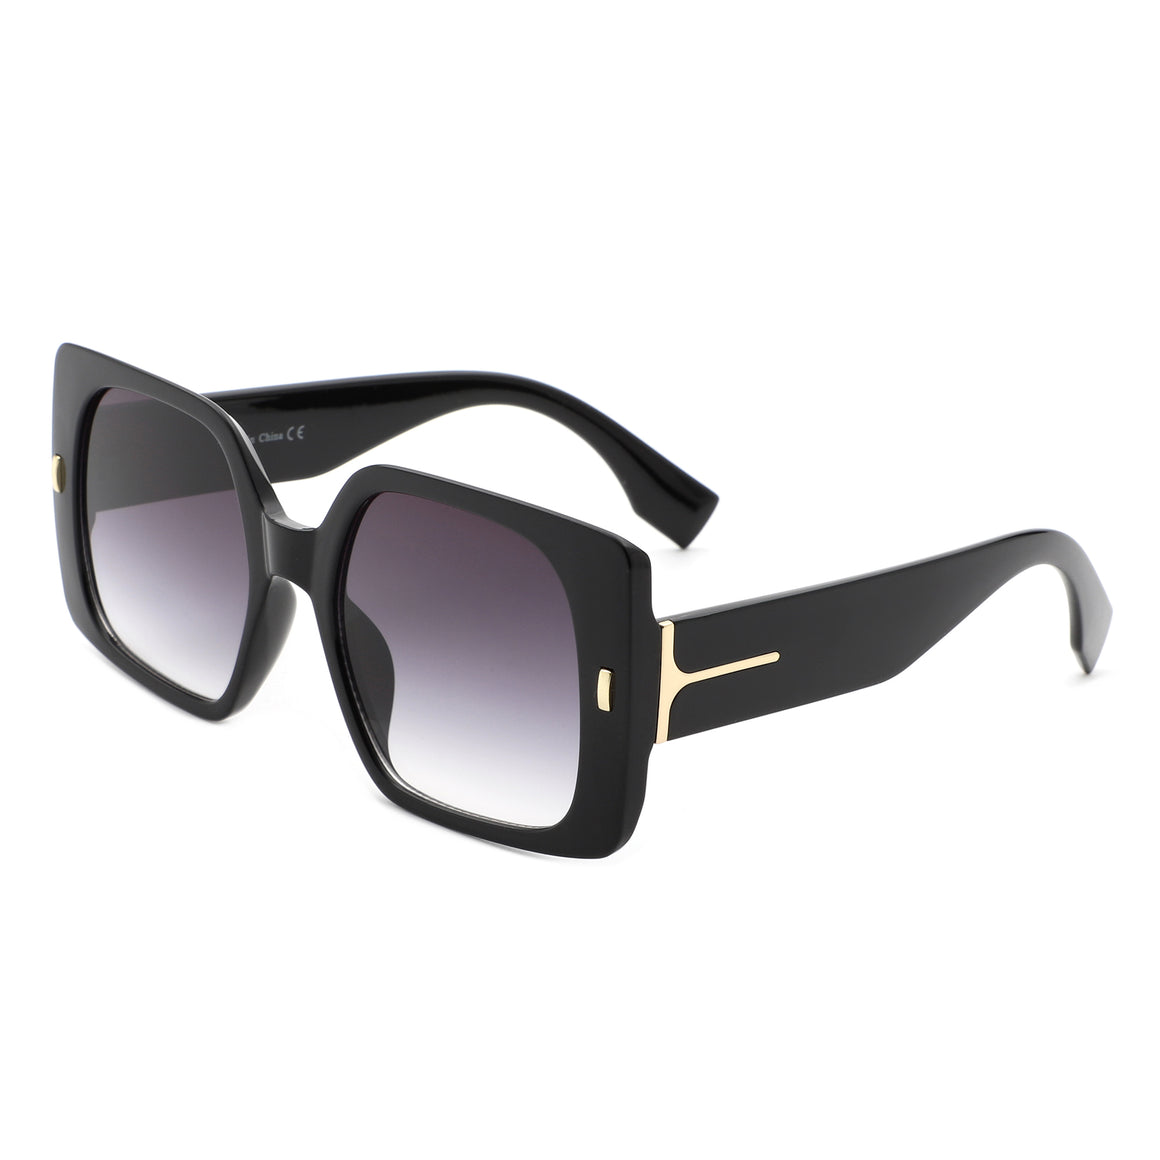 Snap - Chic Square Flat Top Fashion Sunglasses for Women